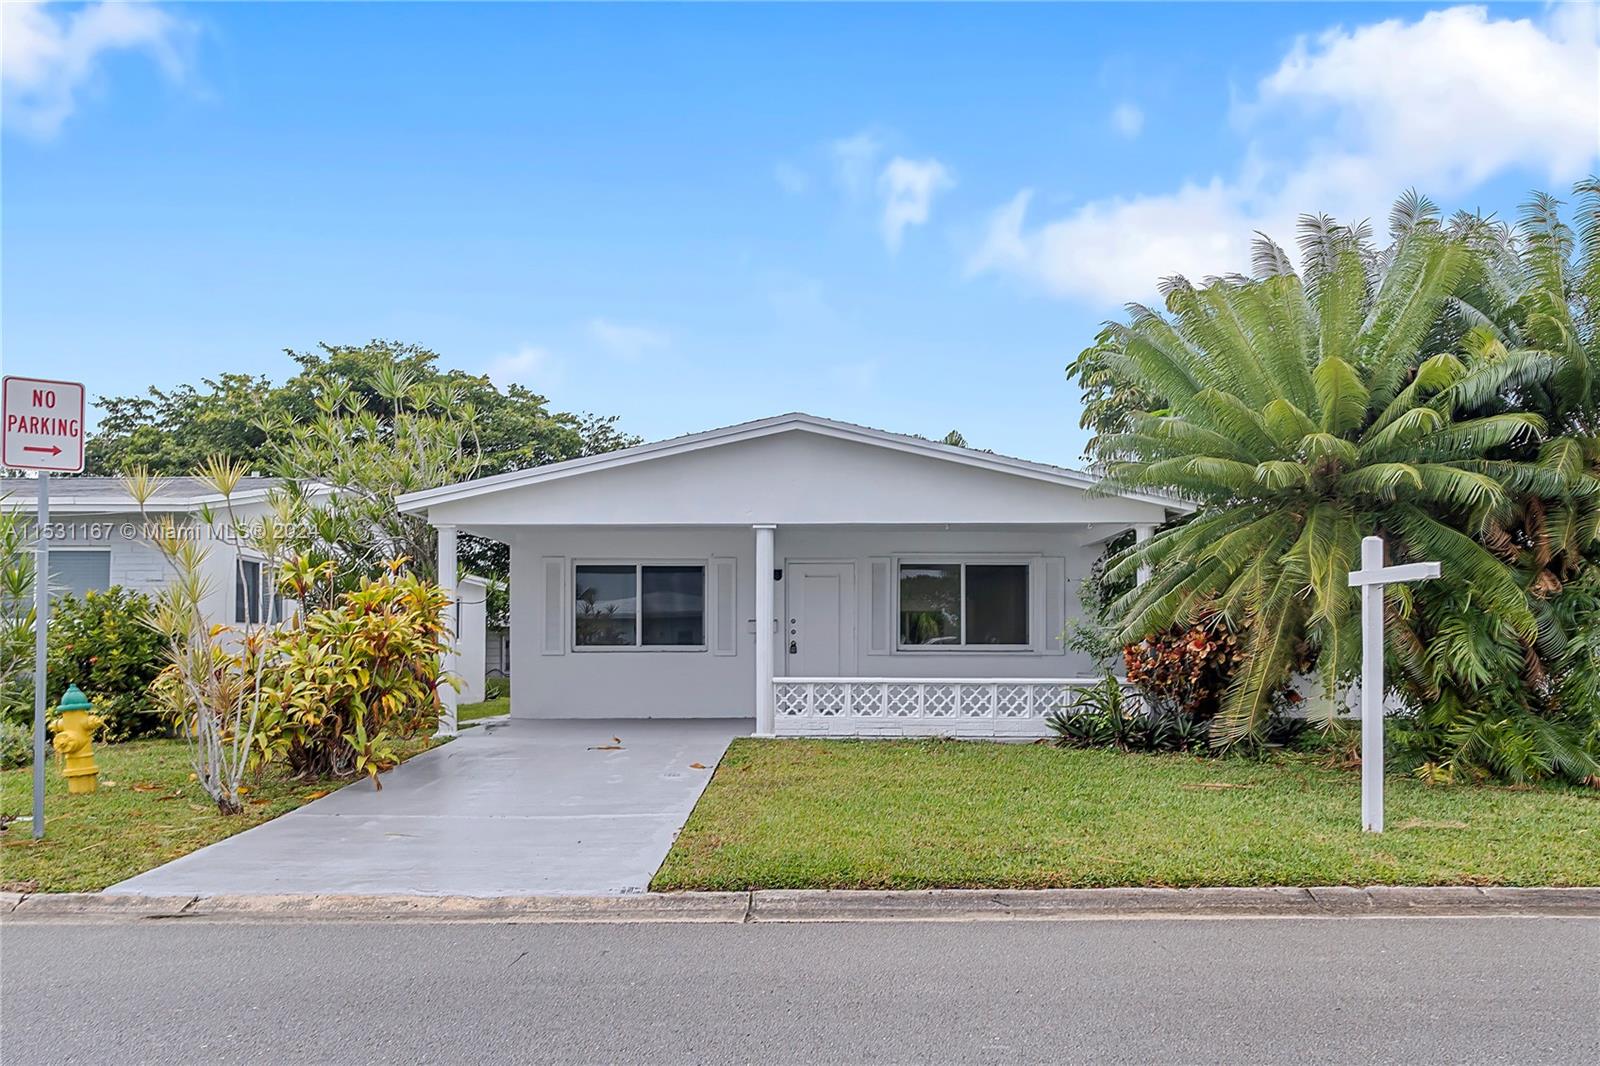 6675 NW 15th ST, Margate, Florida 33063, 3 Bedrooms Bedrooms, ,2 BathroomsBathrooms,Residential,For Sale,6675 NW 15th ST,A11531167